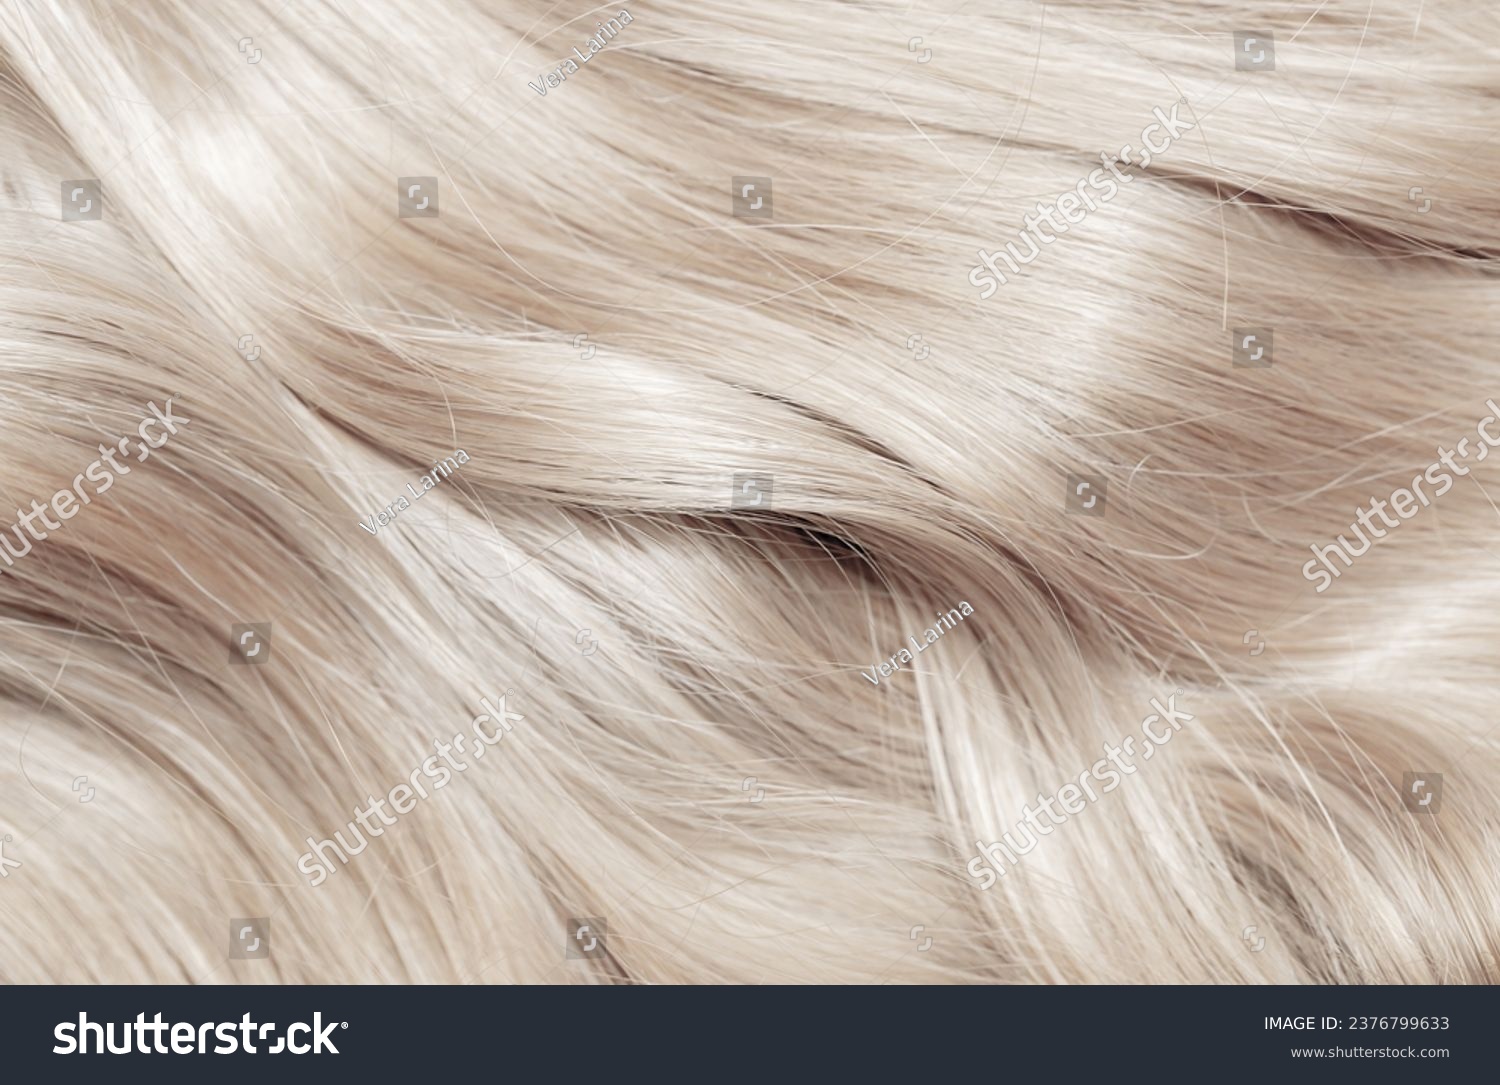 Blond hair close-up as a background. Women's long blonde hair. Beautifully styled wavy shiny curls. Hair coloring. Hairdressing procedures, extension. White hair #2376799633